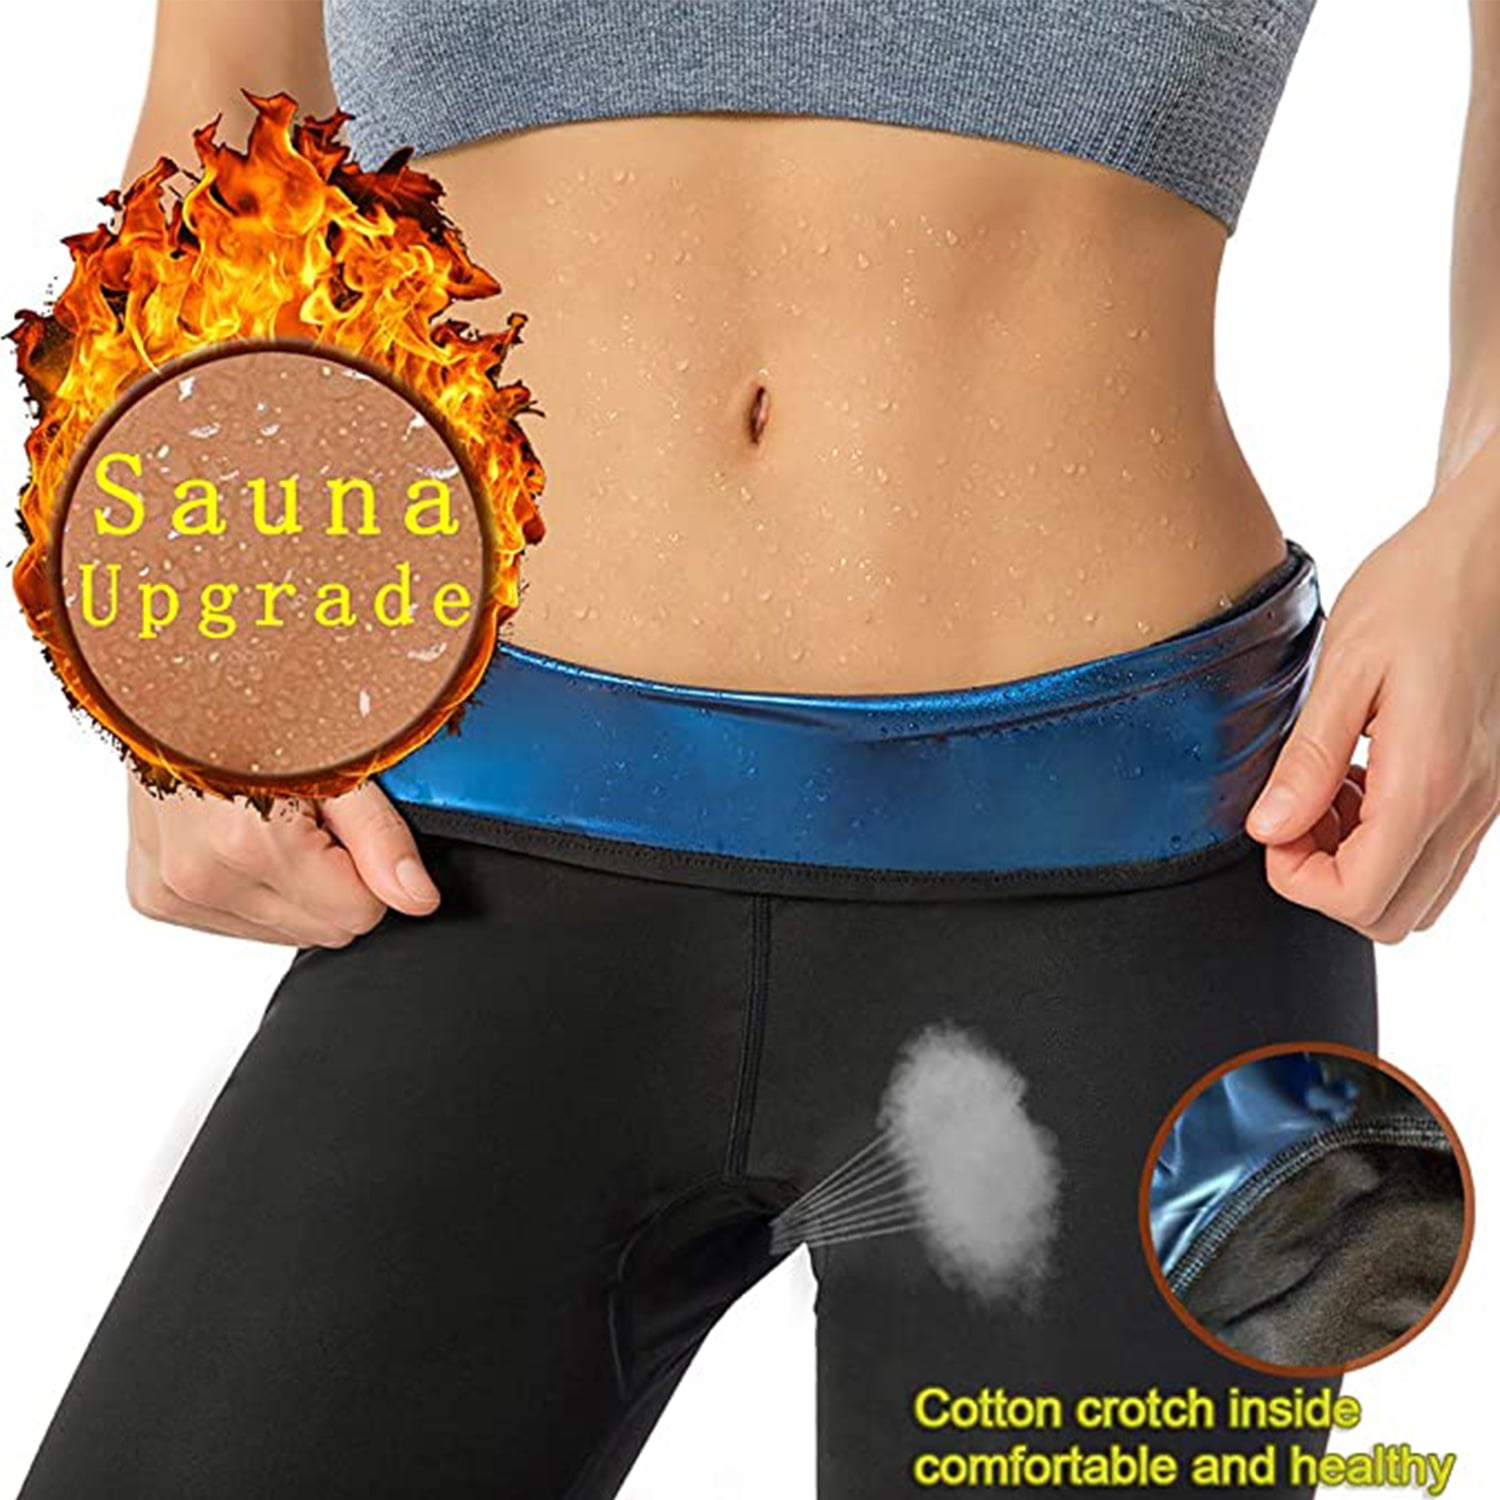 Stomach Workout Toning Massager Body Shaper Leggings Accessories for Yoga Pants MYTREX Angel Health & Fitness Squat Assist Machine Weight Loss Sweat Pant Sauna Pants